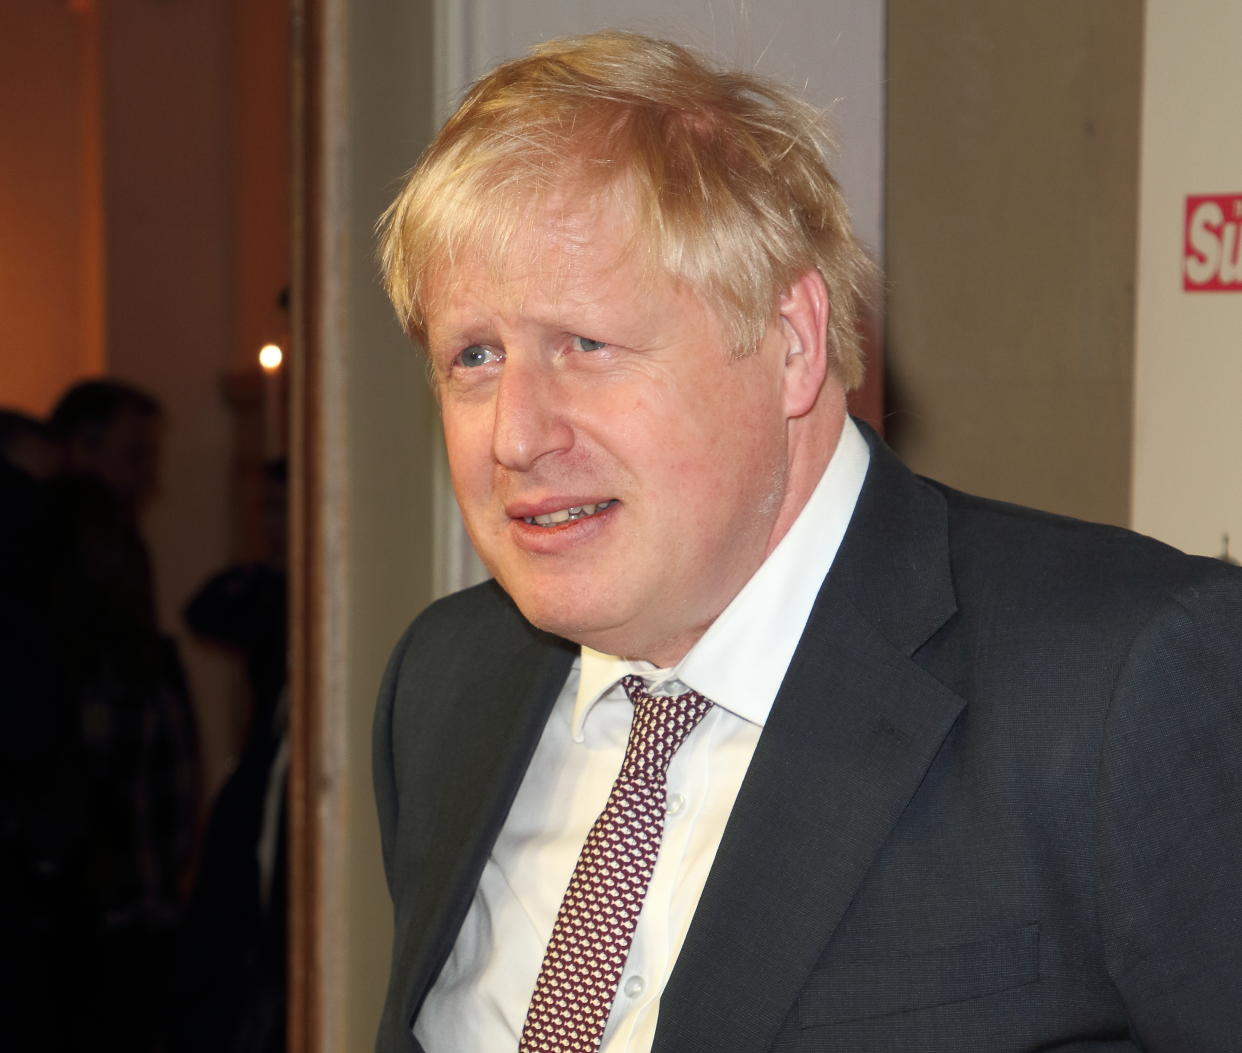 The Prime Minister Boris Johnson attends The Sun Military Awards 2020 at the Banqueting House in London. (Photo by Keith Mayhew / SOPA Images/Sipa USA)